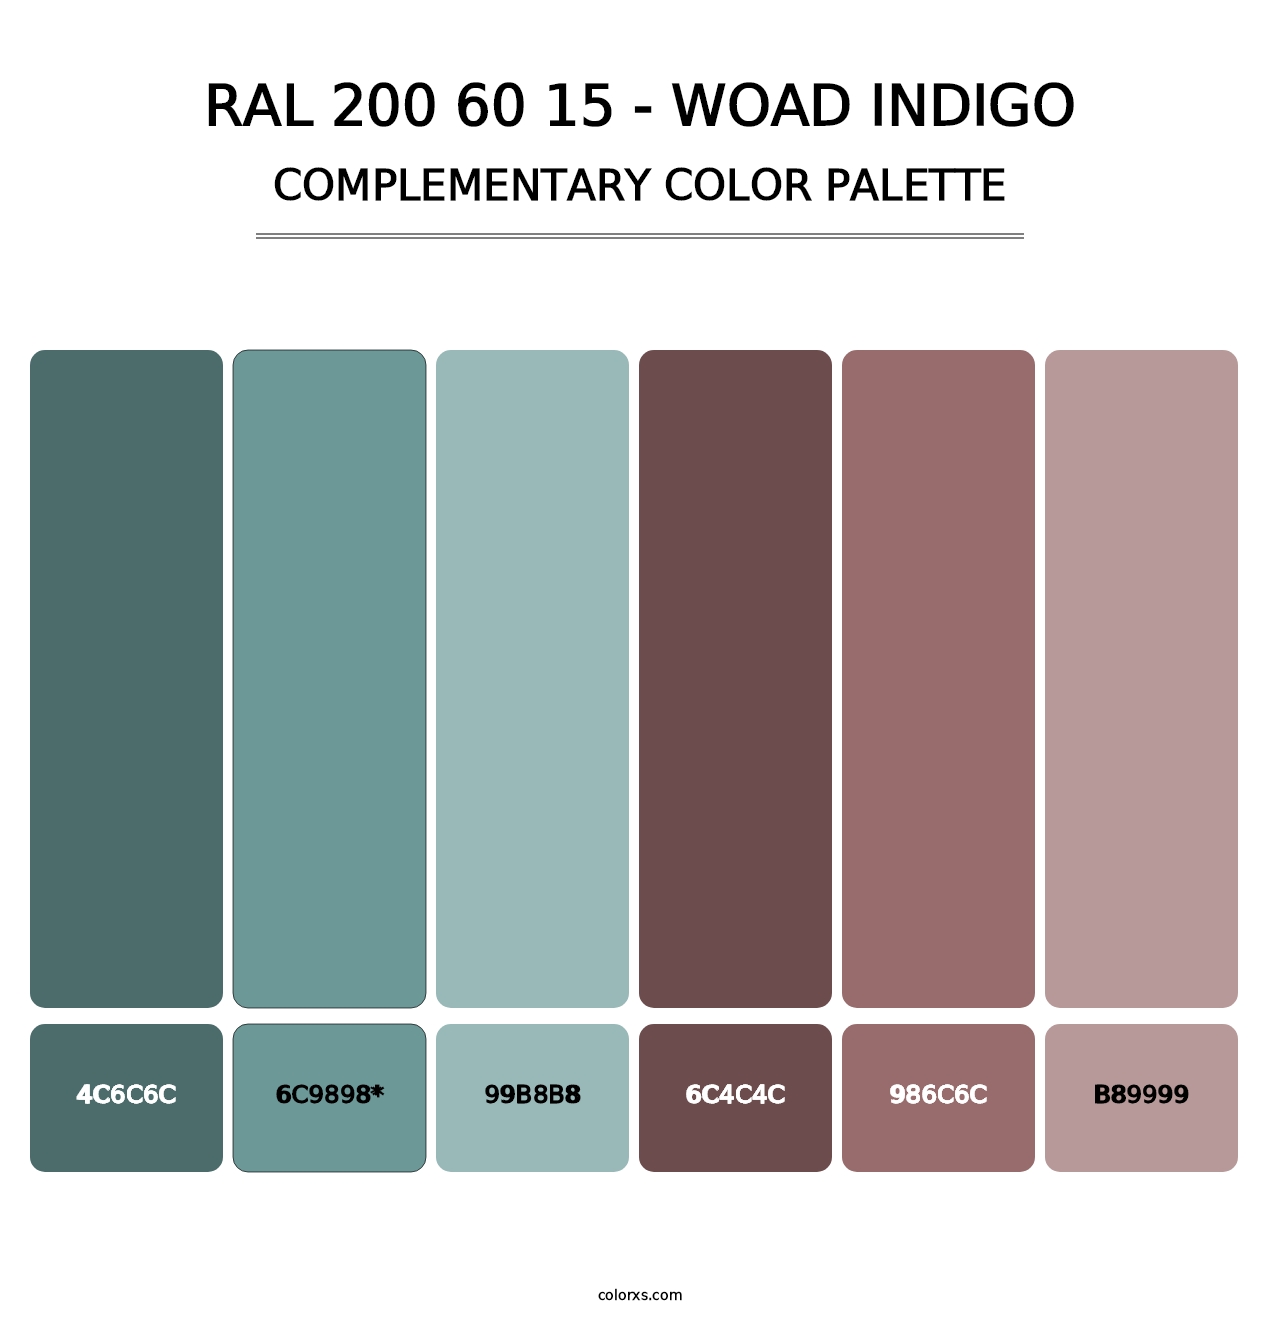 RAL 200 60 15 - Woad Indigo - Complementary Color Palette